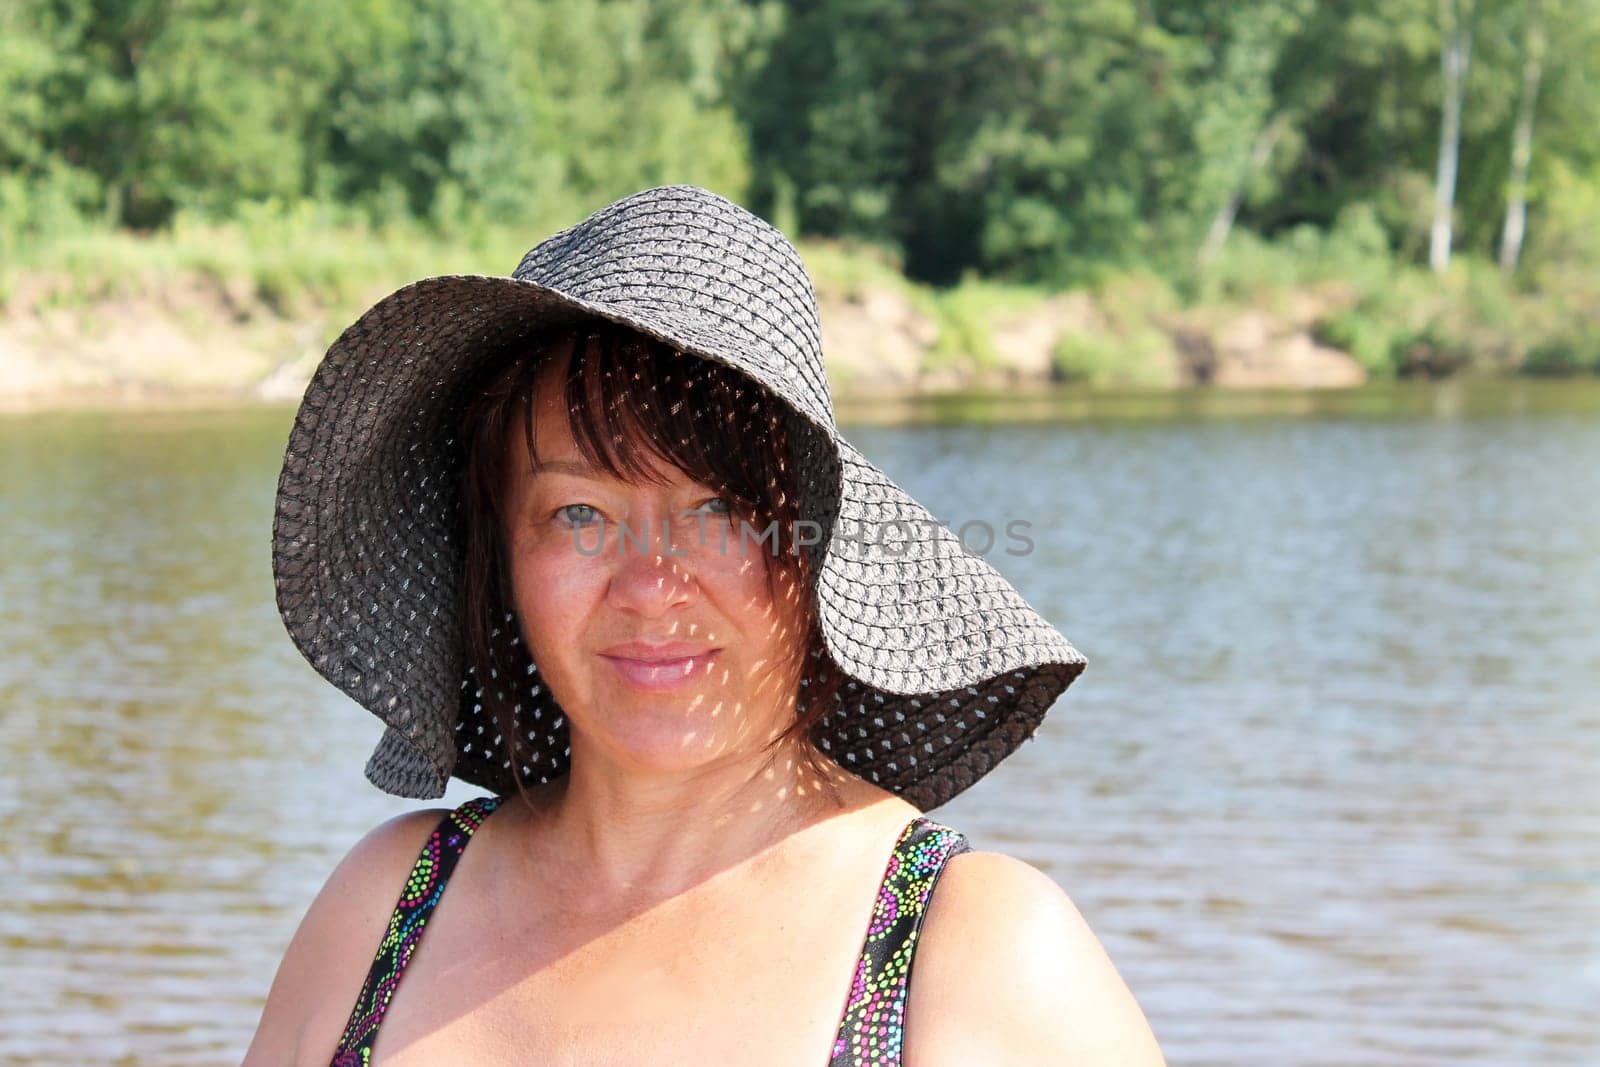 portrait of a smiling middle-aged brunette woman in a straw hat on the river bank on a sunny day by Annado